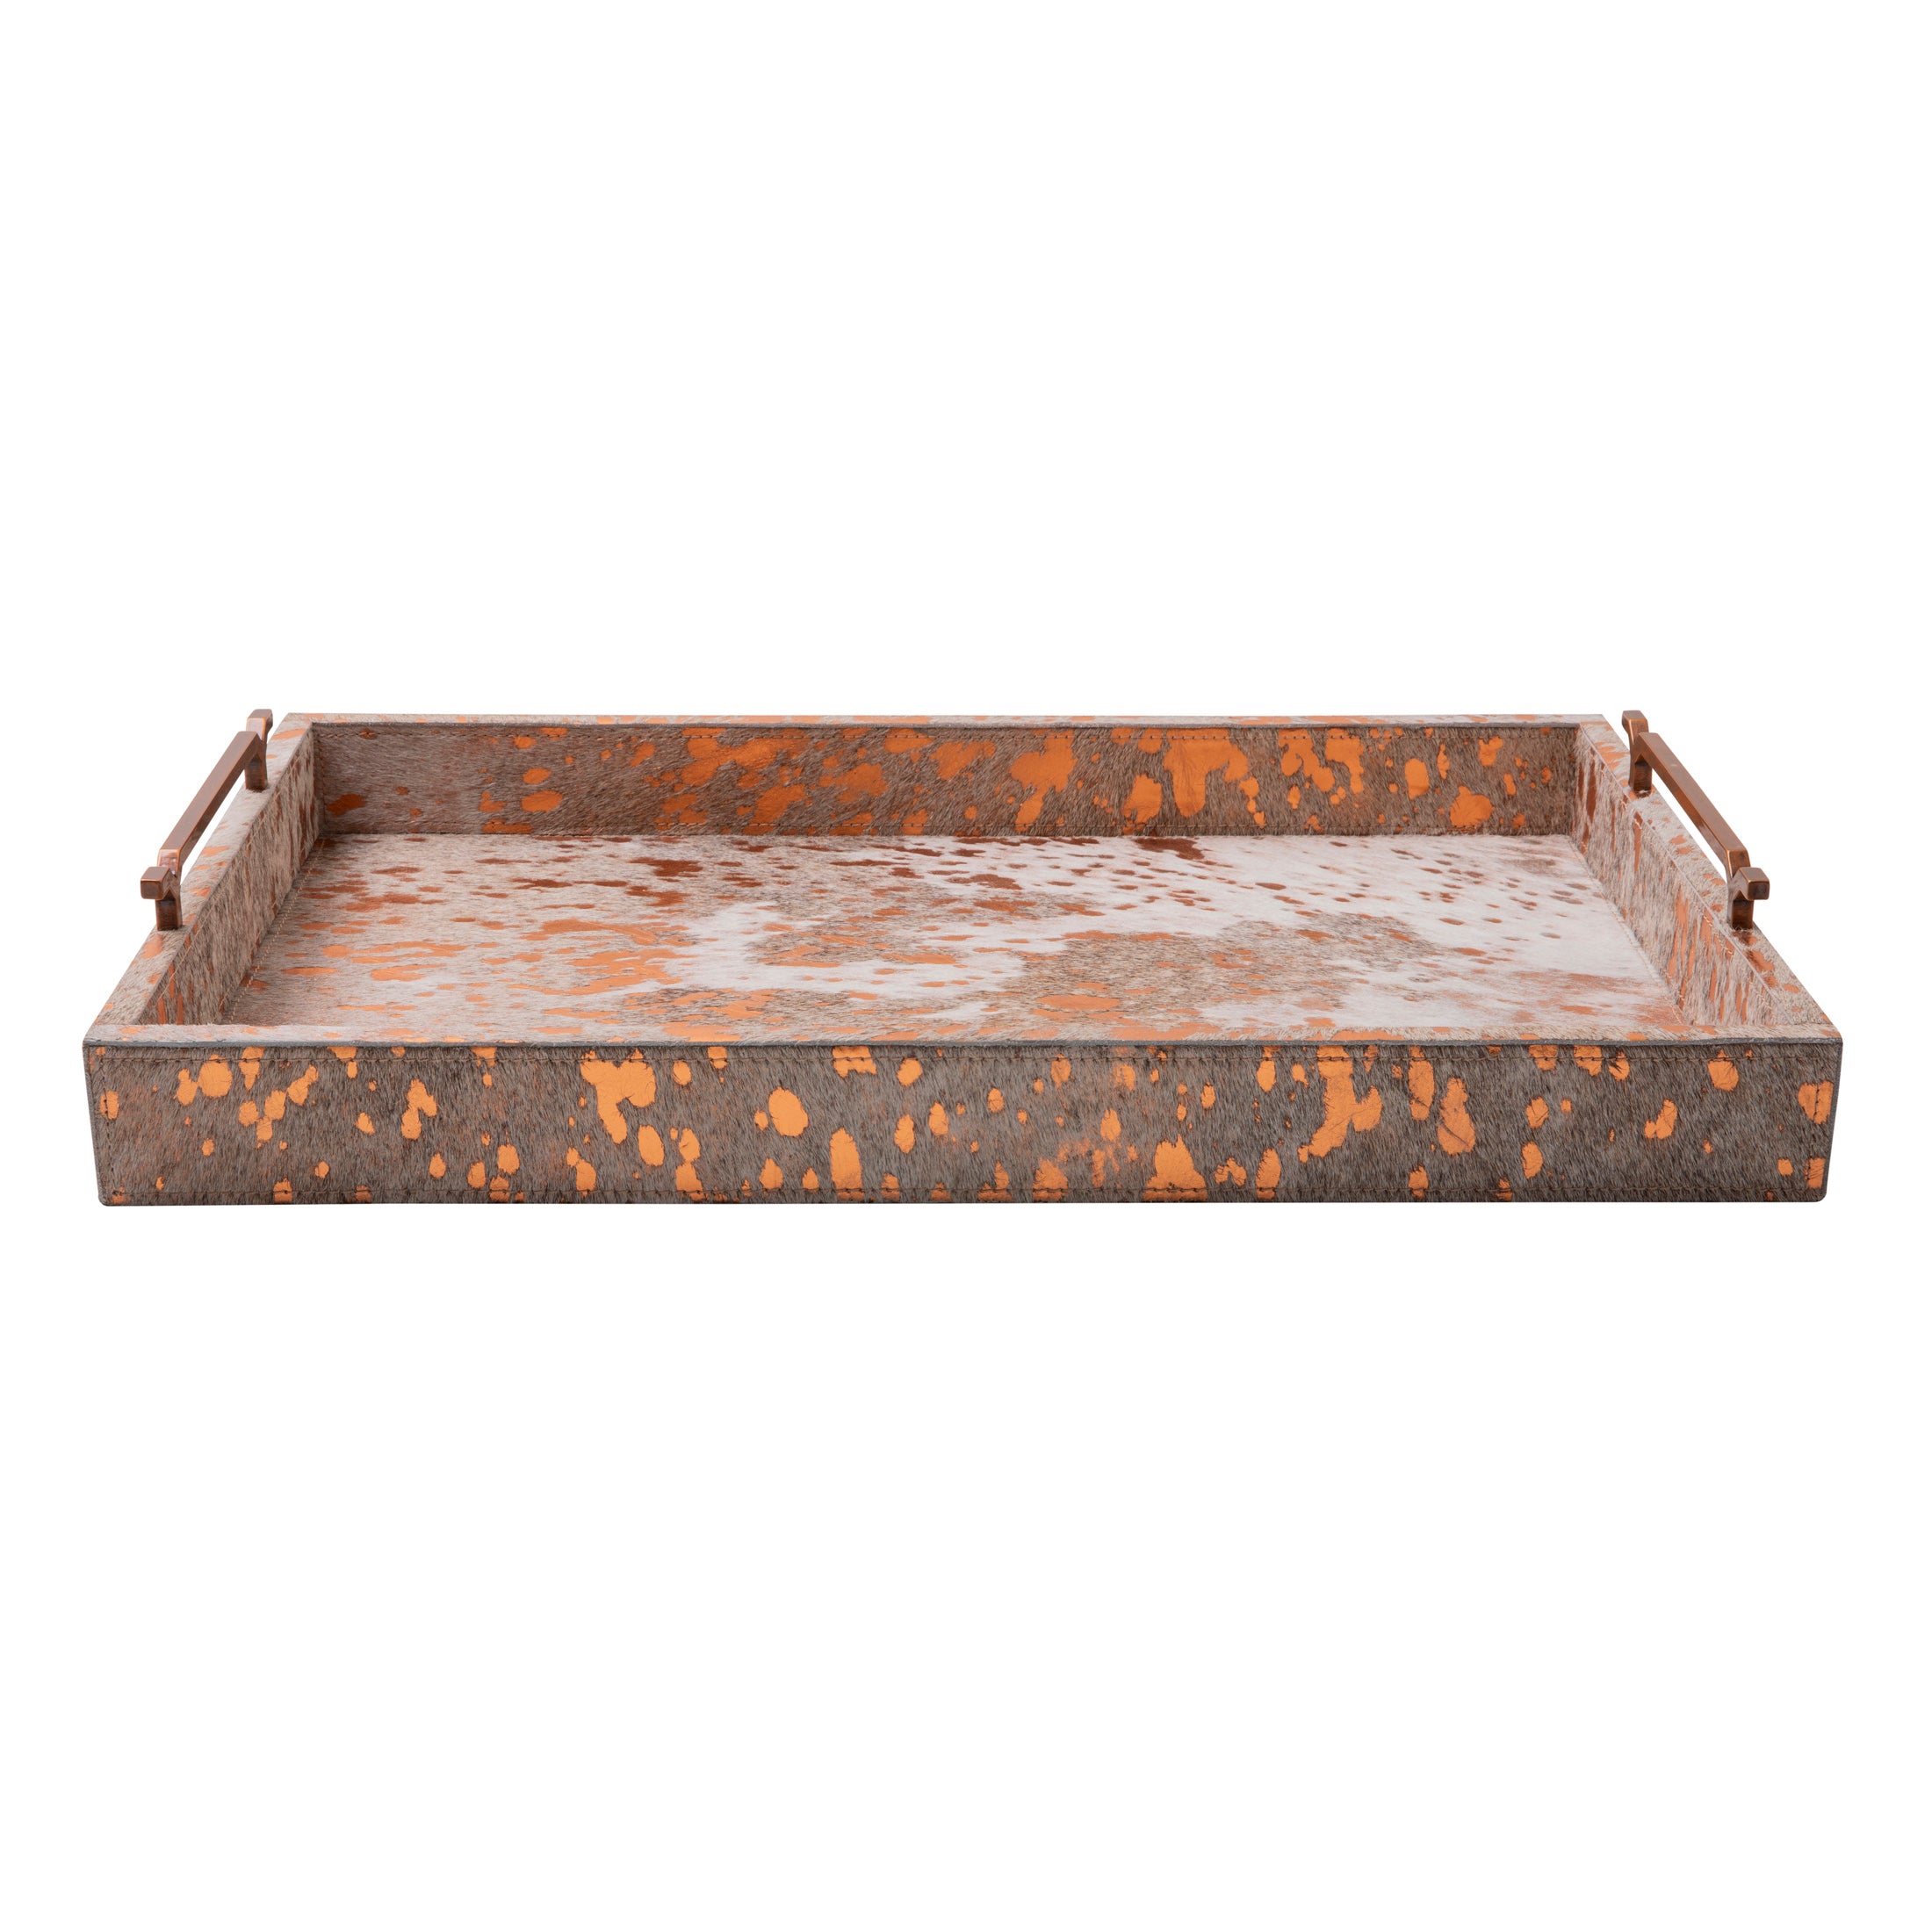 Metallic Copper Cow Hide Tray - Large